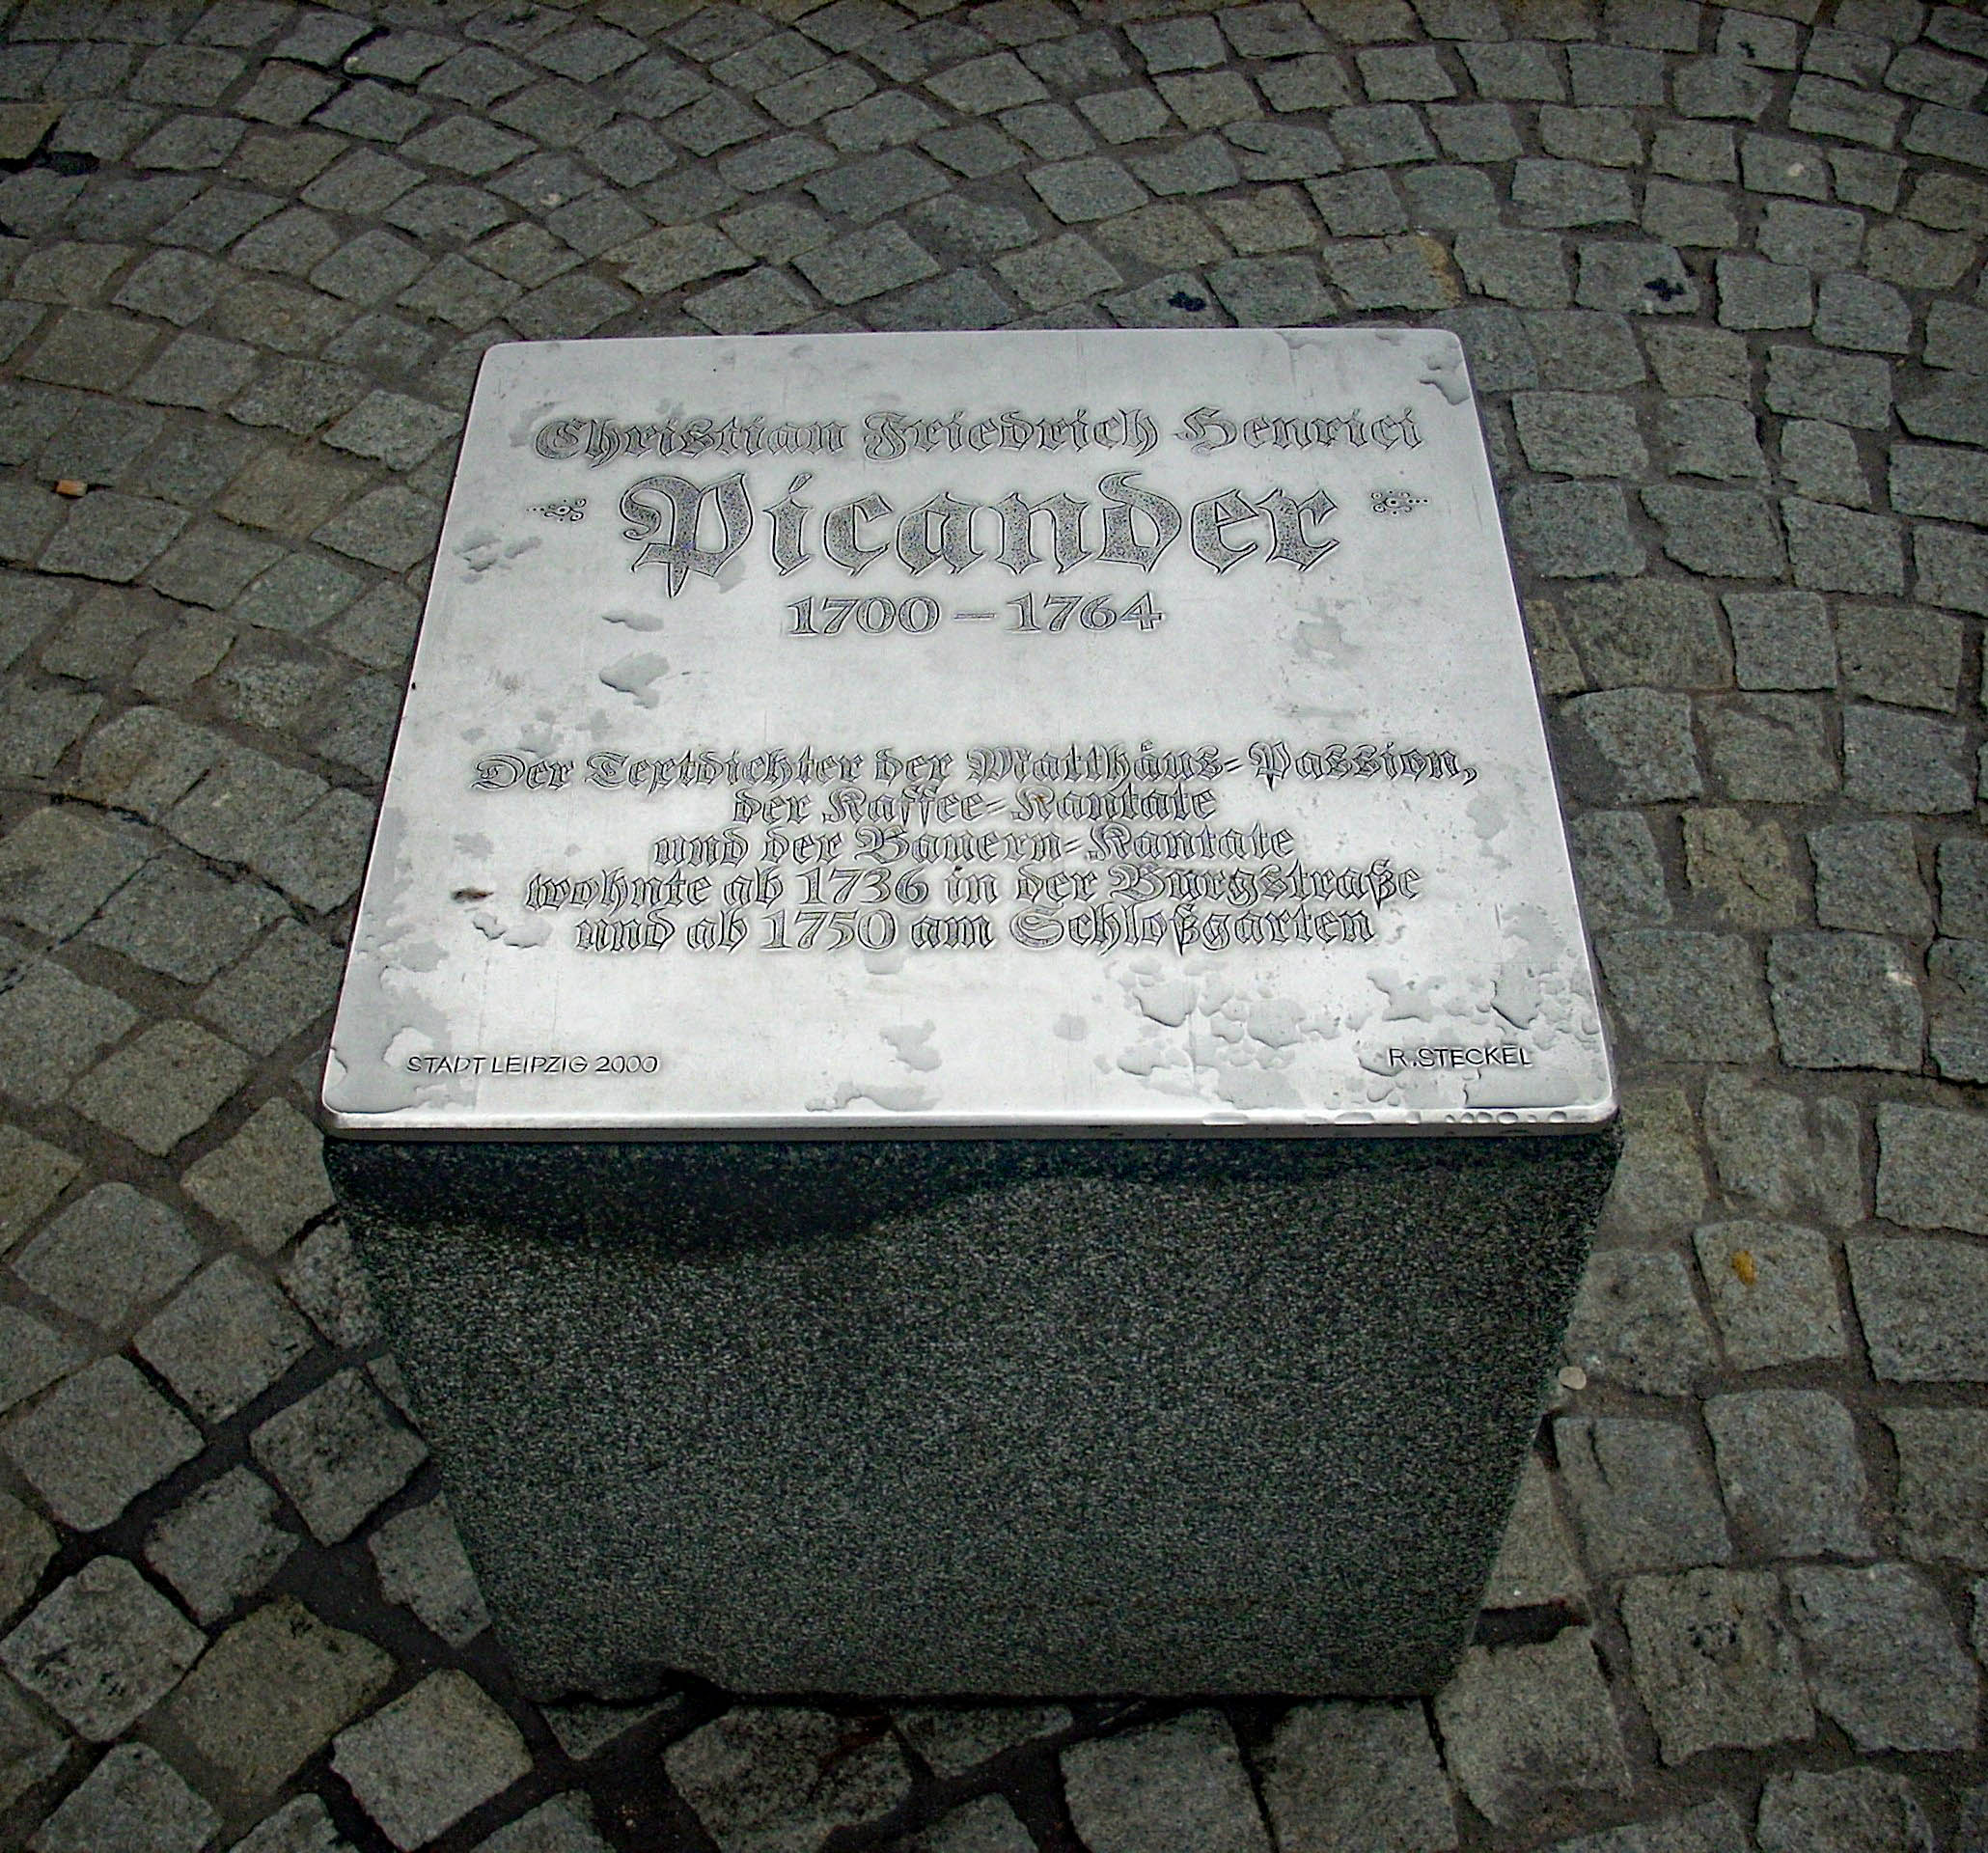 Memorial plaque in the Burgplatz in Leipzig for Christian Friedrich Henrici (January 14, 1700 – May 10, 1764), writing under his pen name Picander, author of the libretti of many Bach cantatas, including the Matthaeus Passion and the Coffee Cantata.